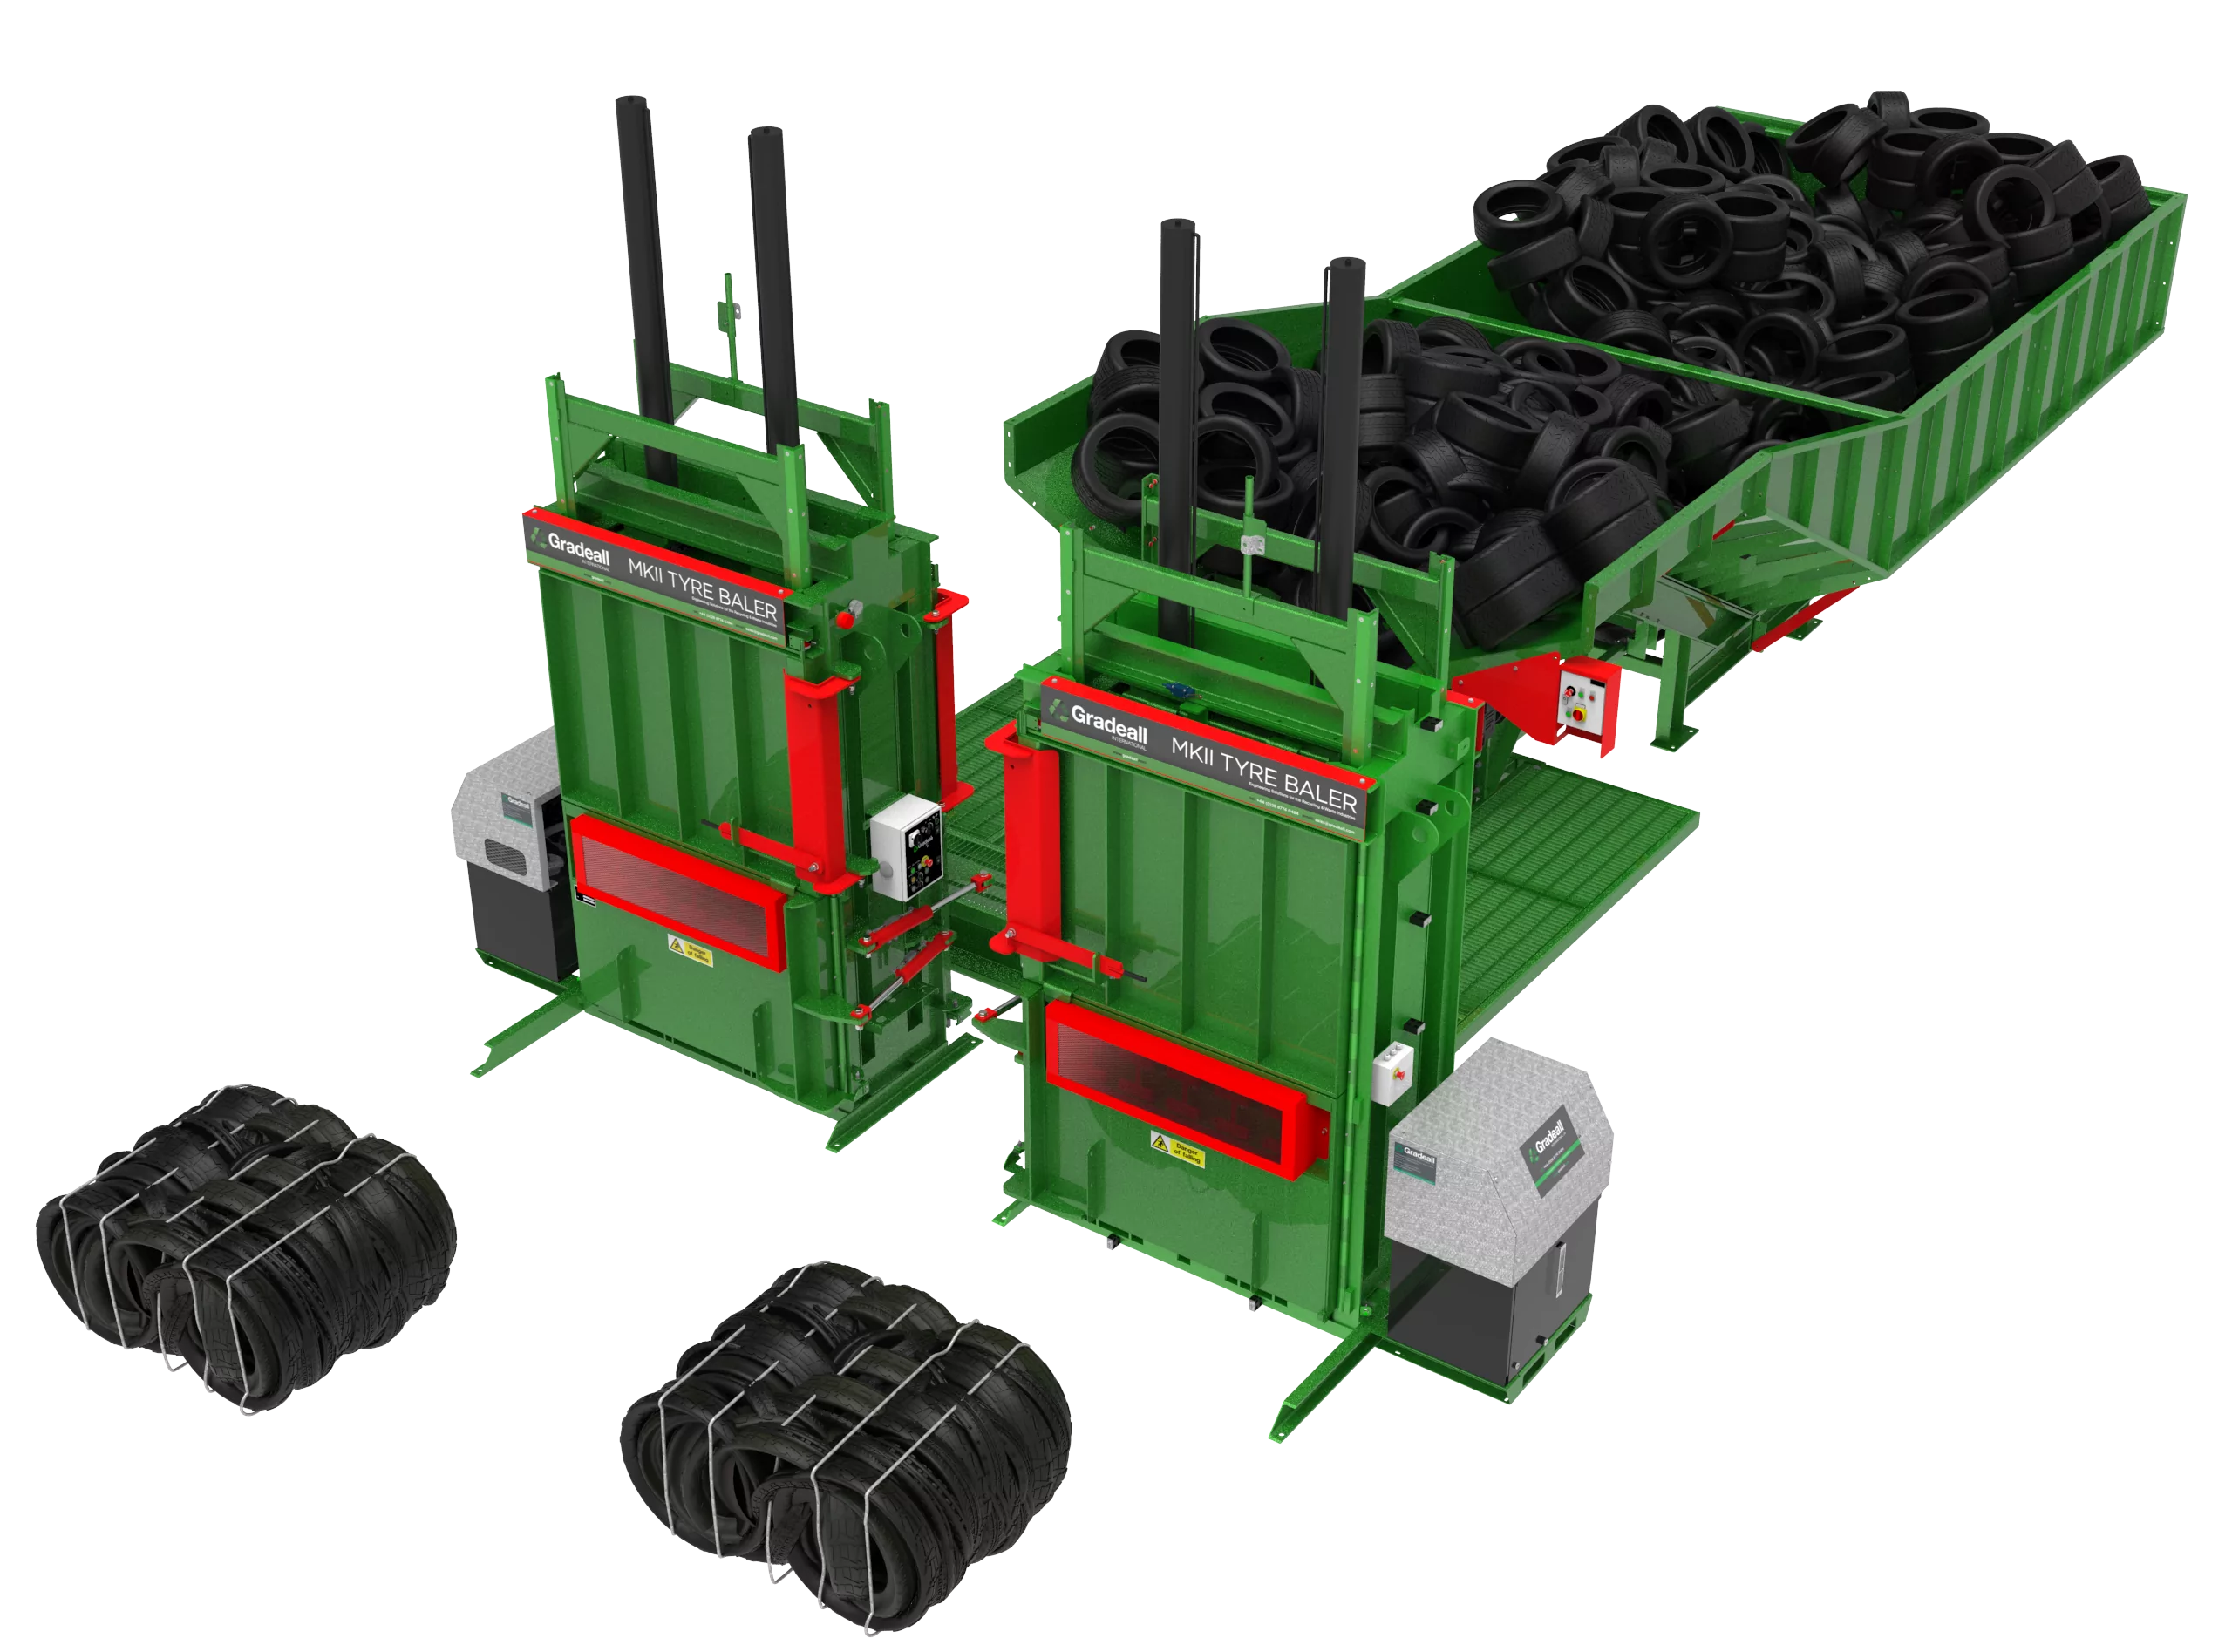 Render of Gradeall's Inclined Tyre Baler Conveyor with two MK2 Tyre Balers efficiently processing a large volume of tyres.